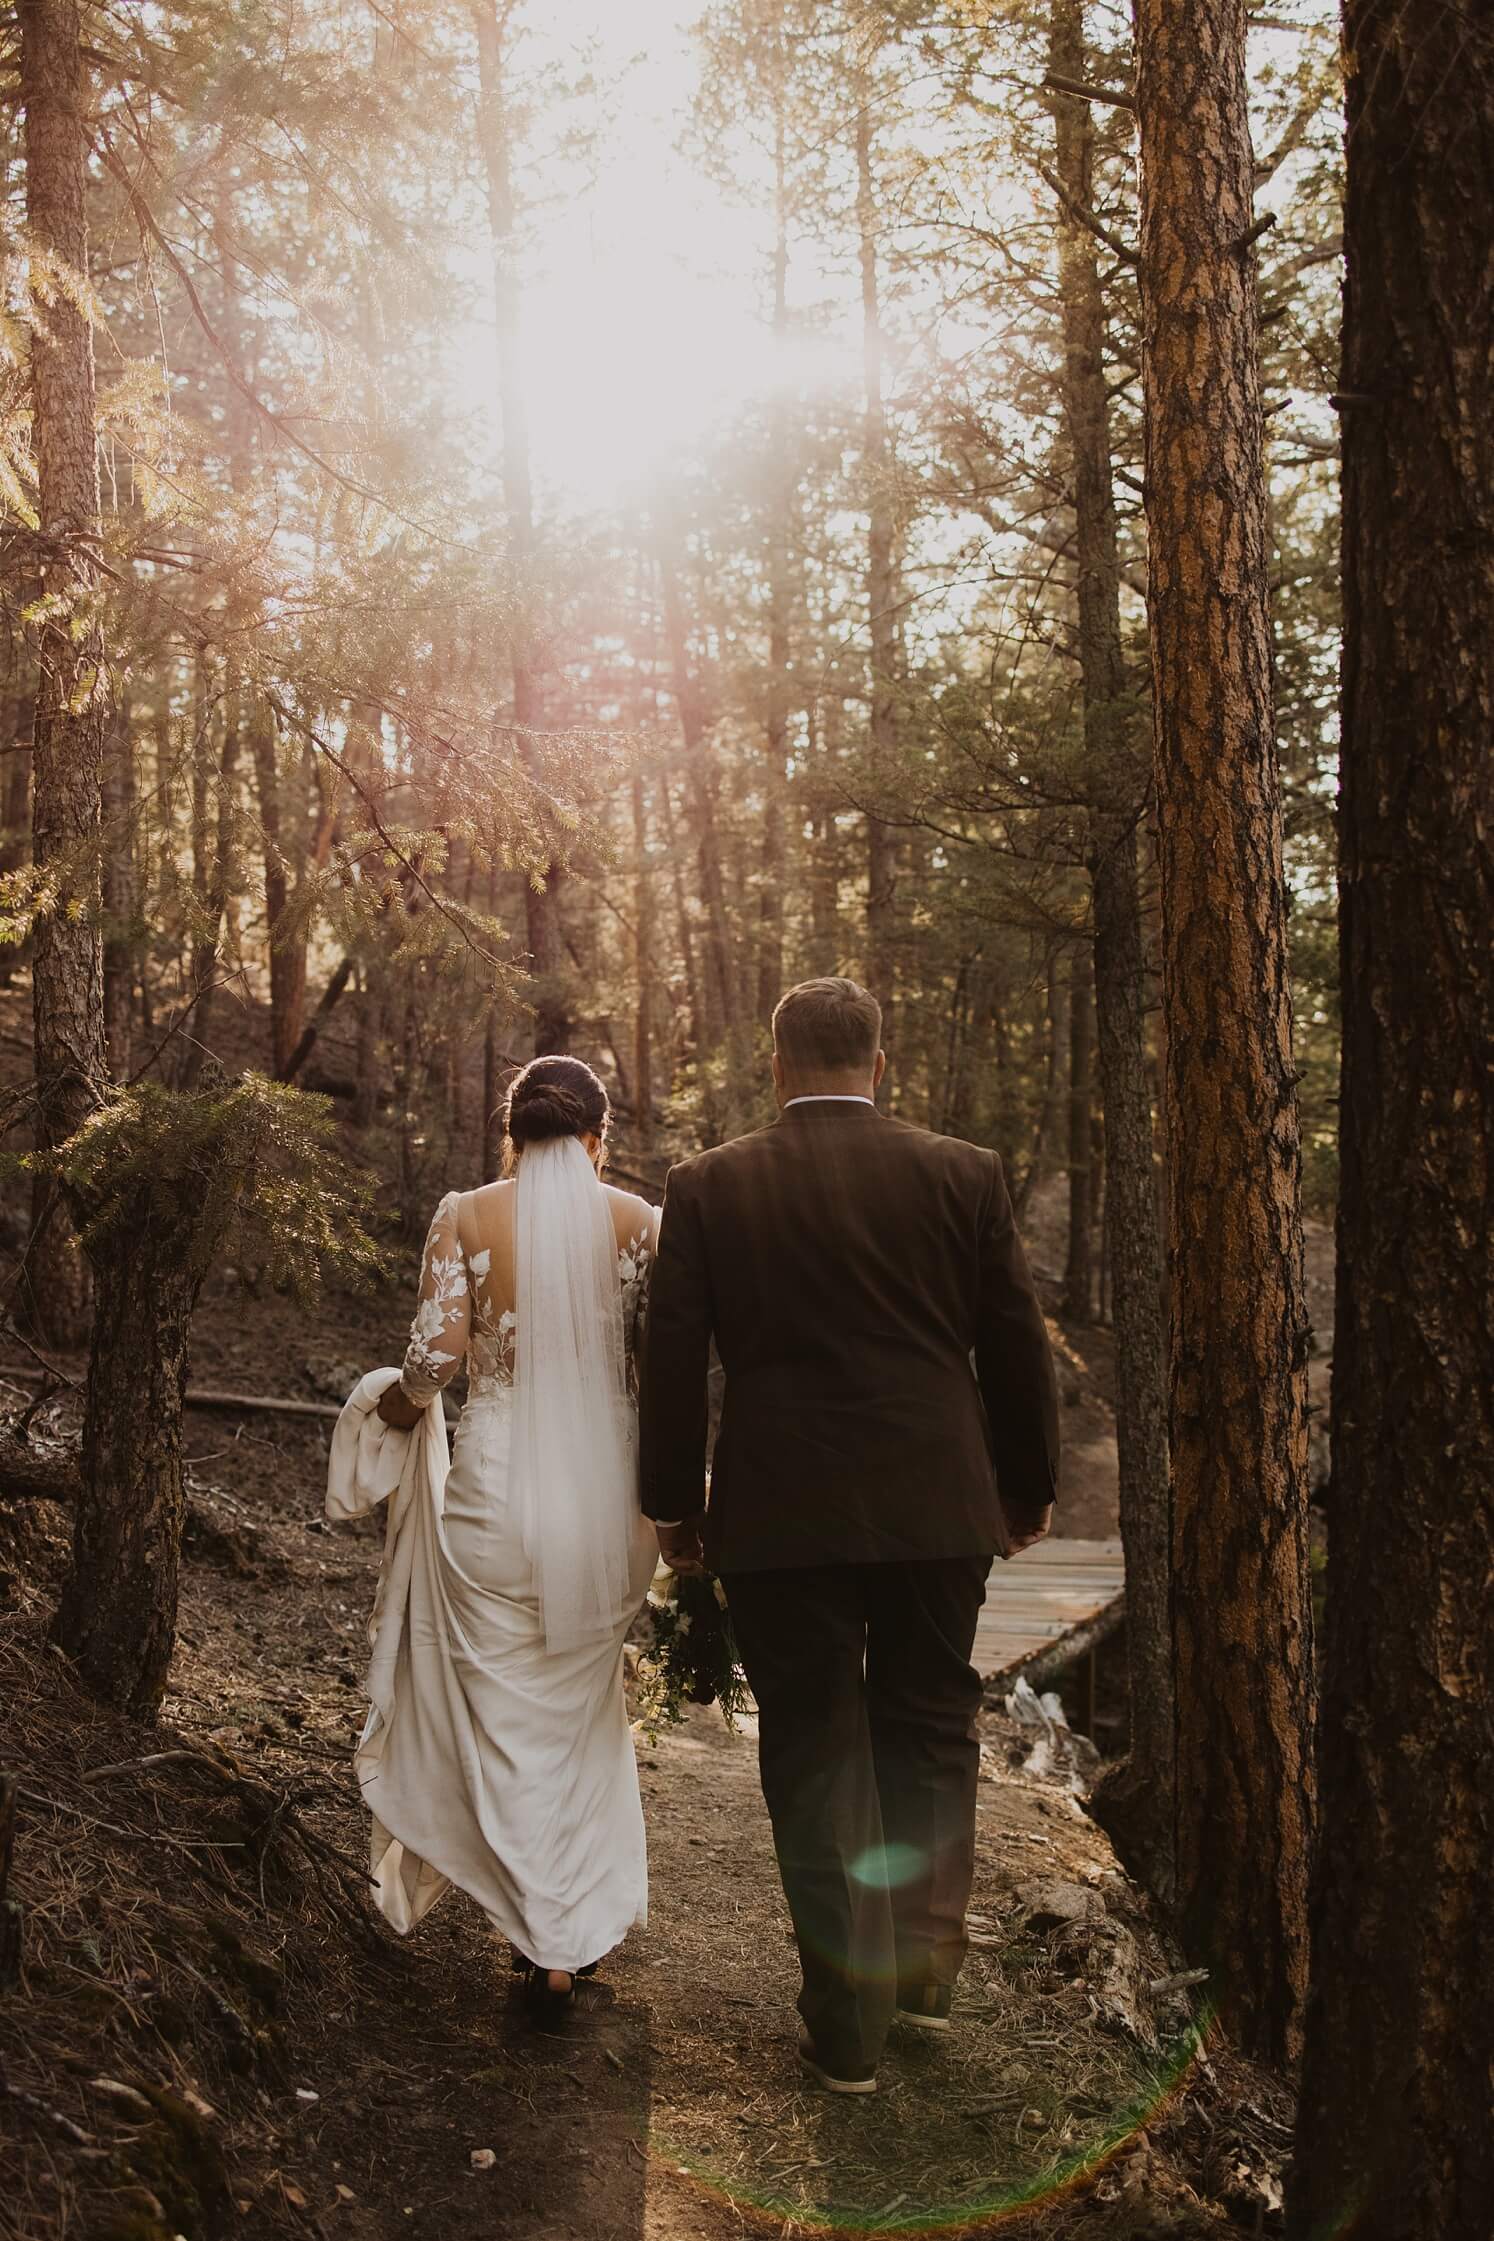 Bride and groom walking through forest at Evergreen wedding venue | McArthur Weddings and Events